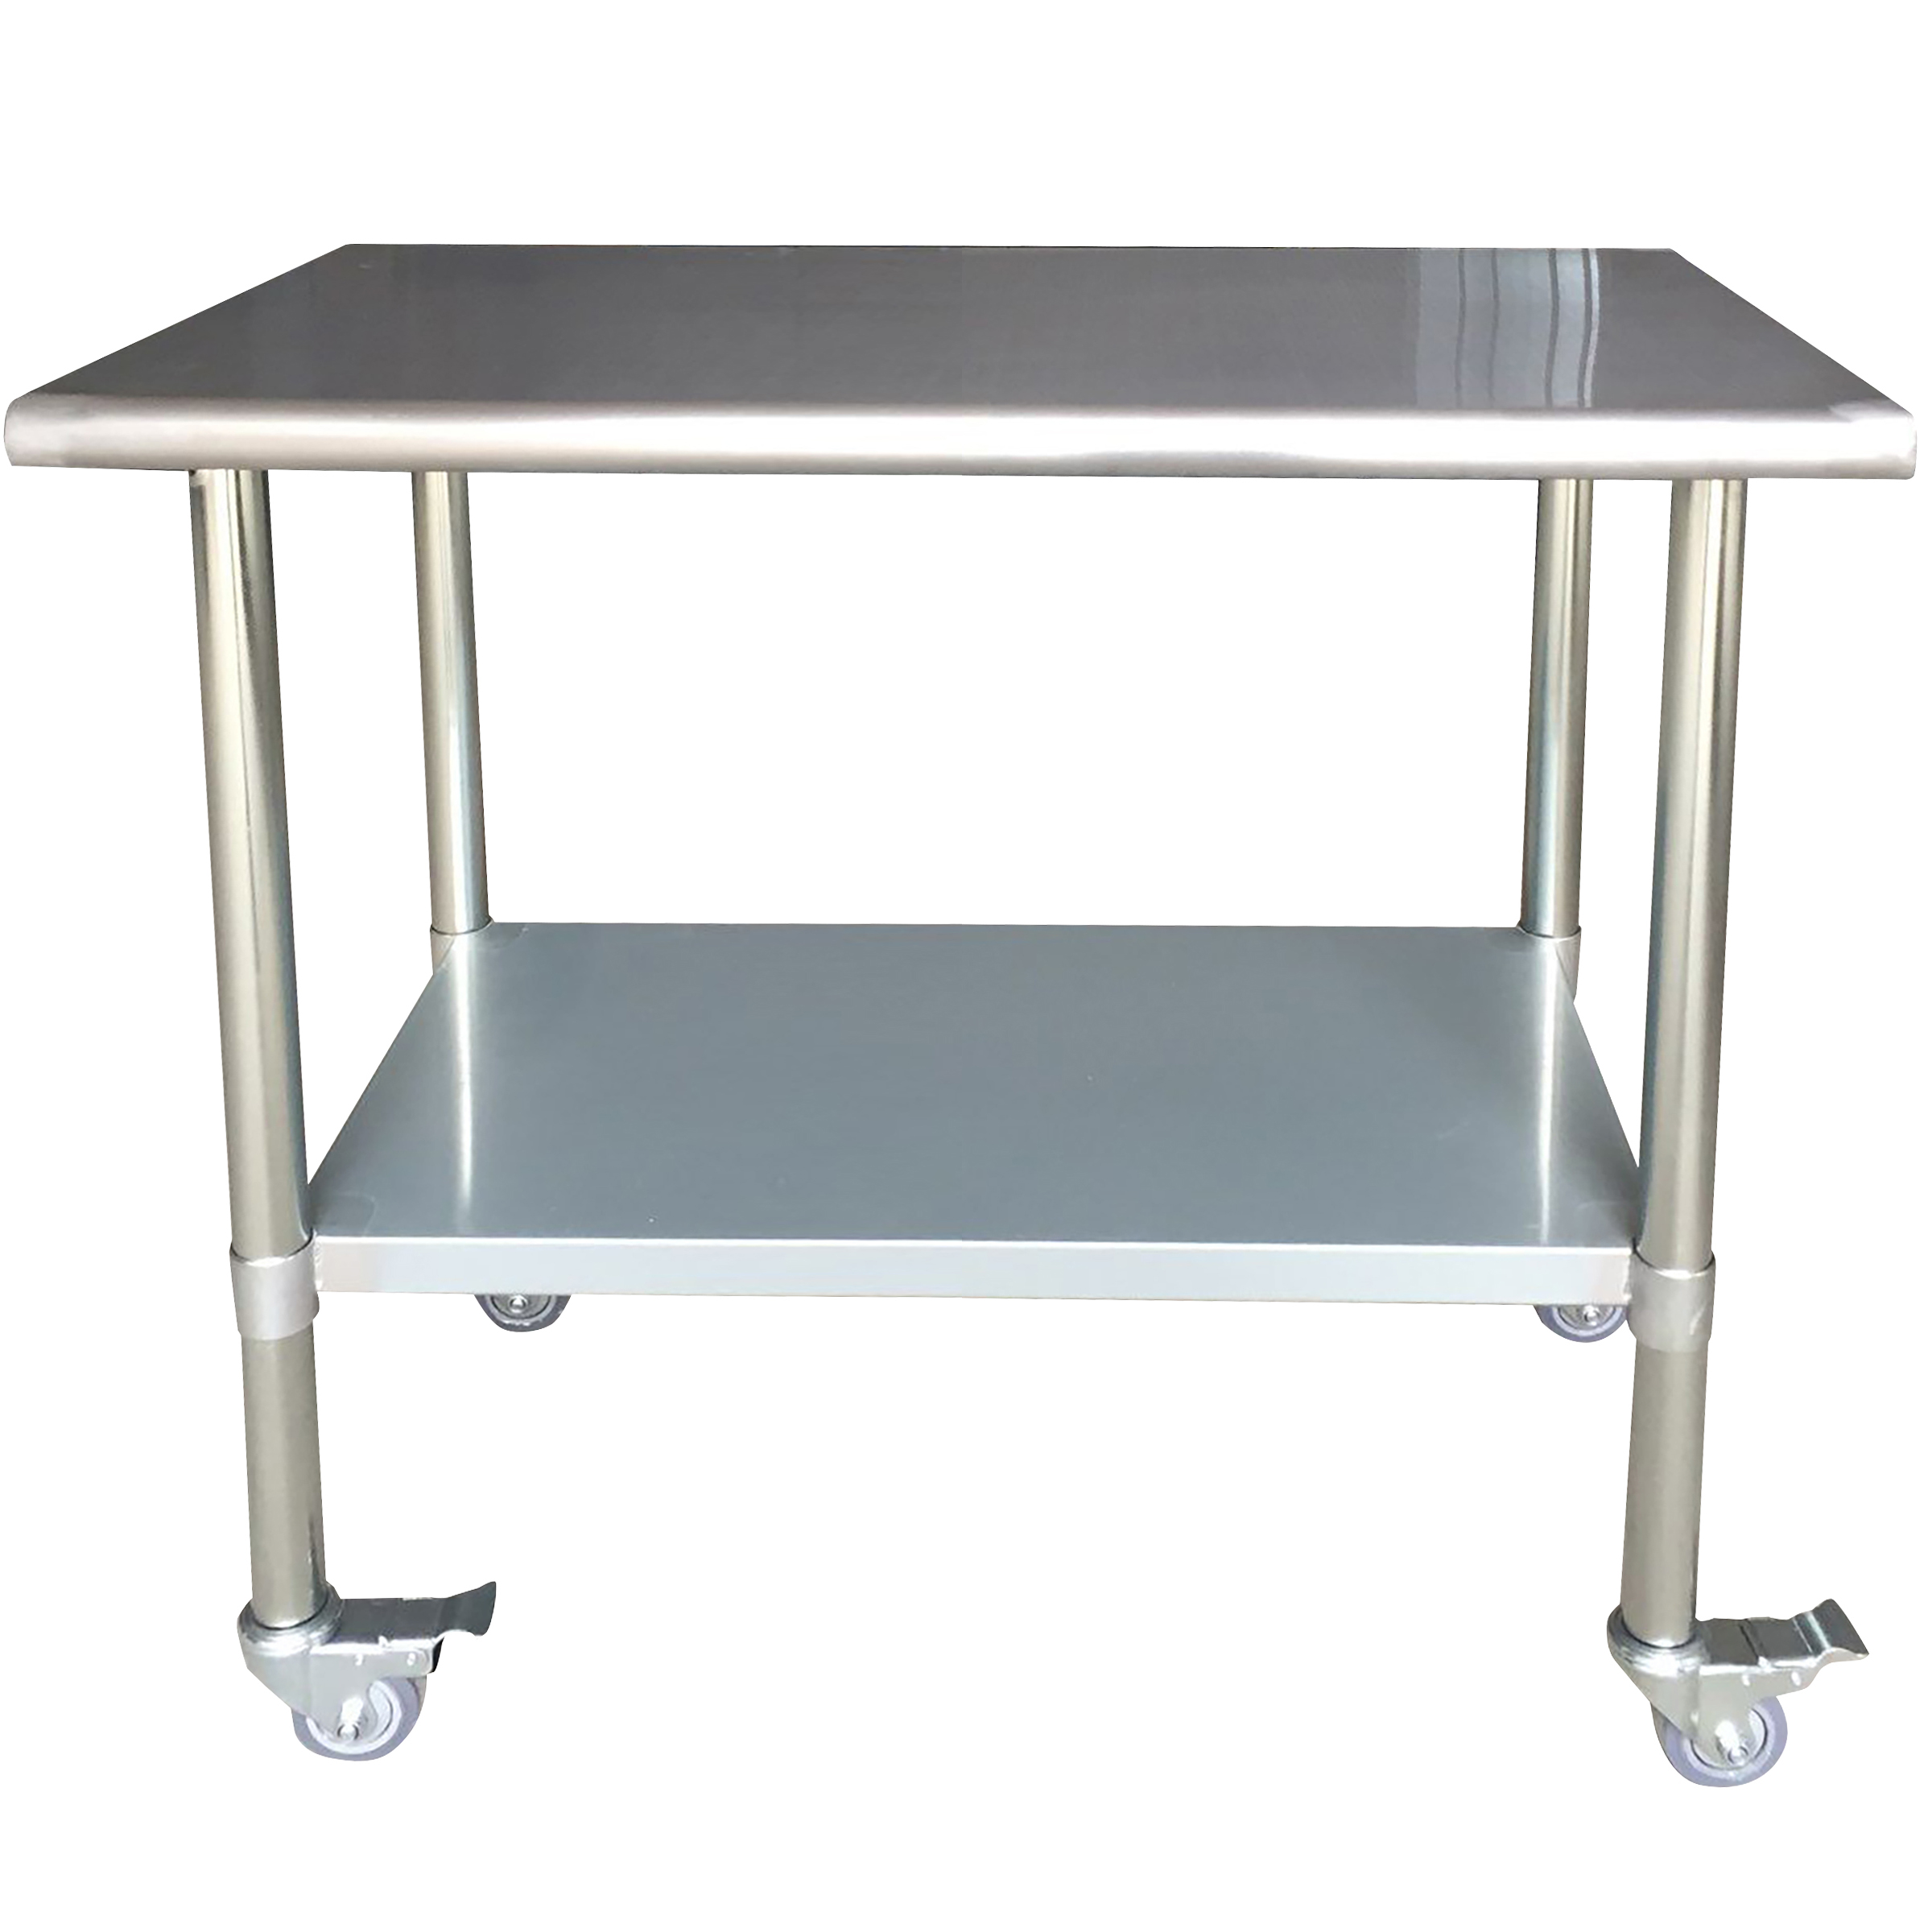 Stainless Steel Work Table with Casters 24 x 48 Inches